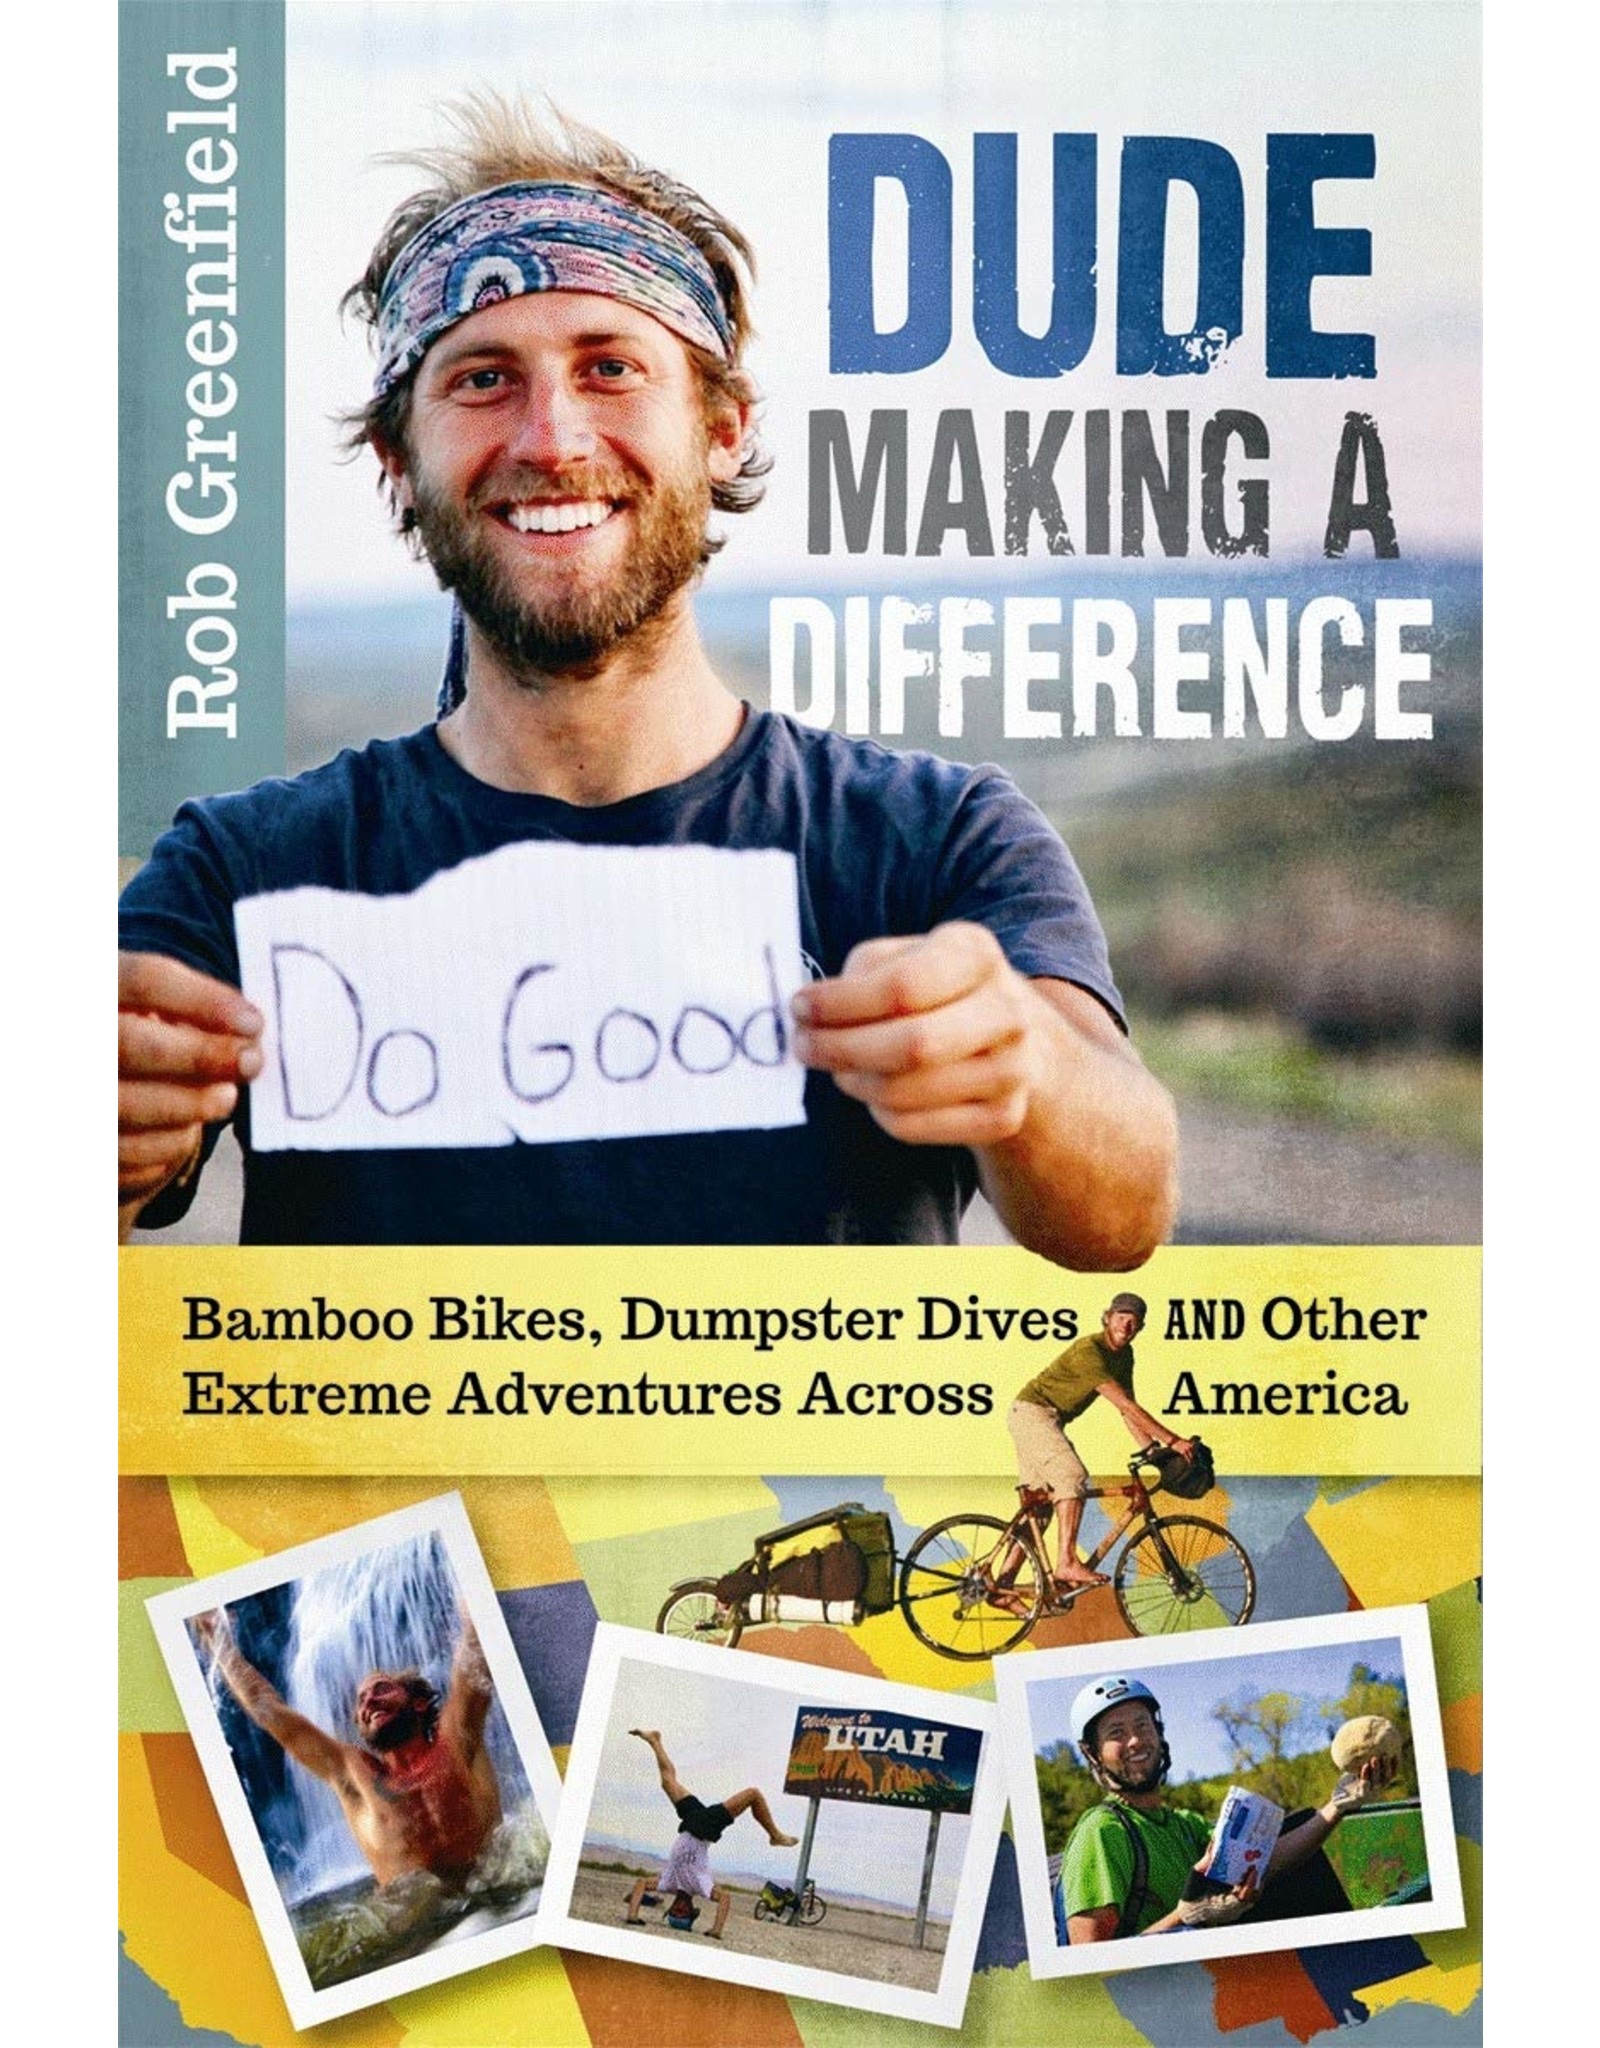 Literature Dude Making a Difference: Bamboo Bikes, Dumpster Dives and Other Extreme Adventures Across America